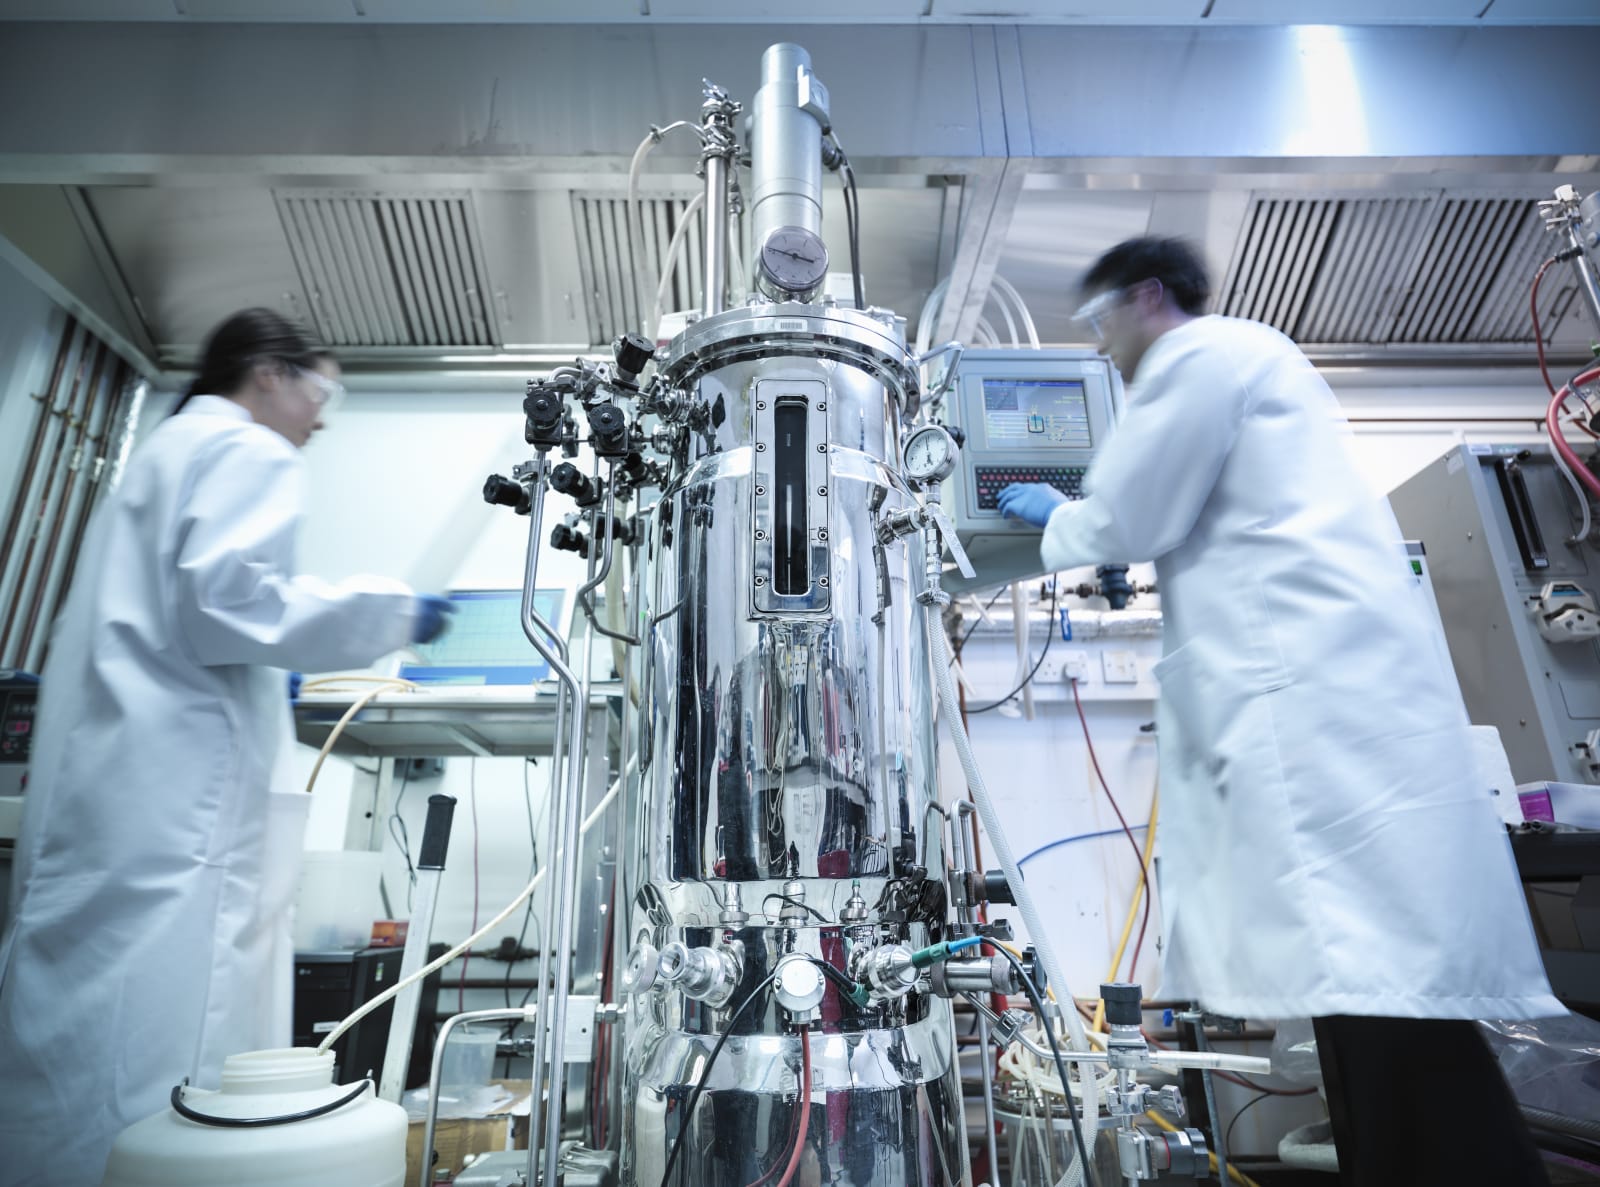 Scientists working in protein production where cells and culture samples are created in a bioreactor